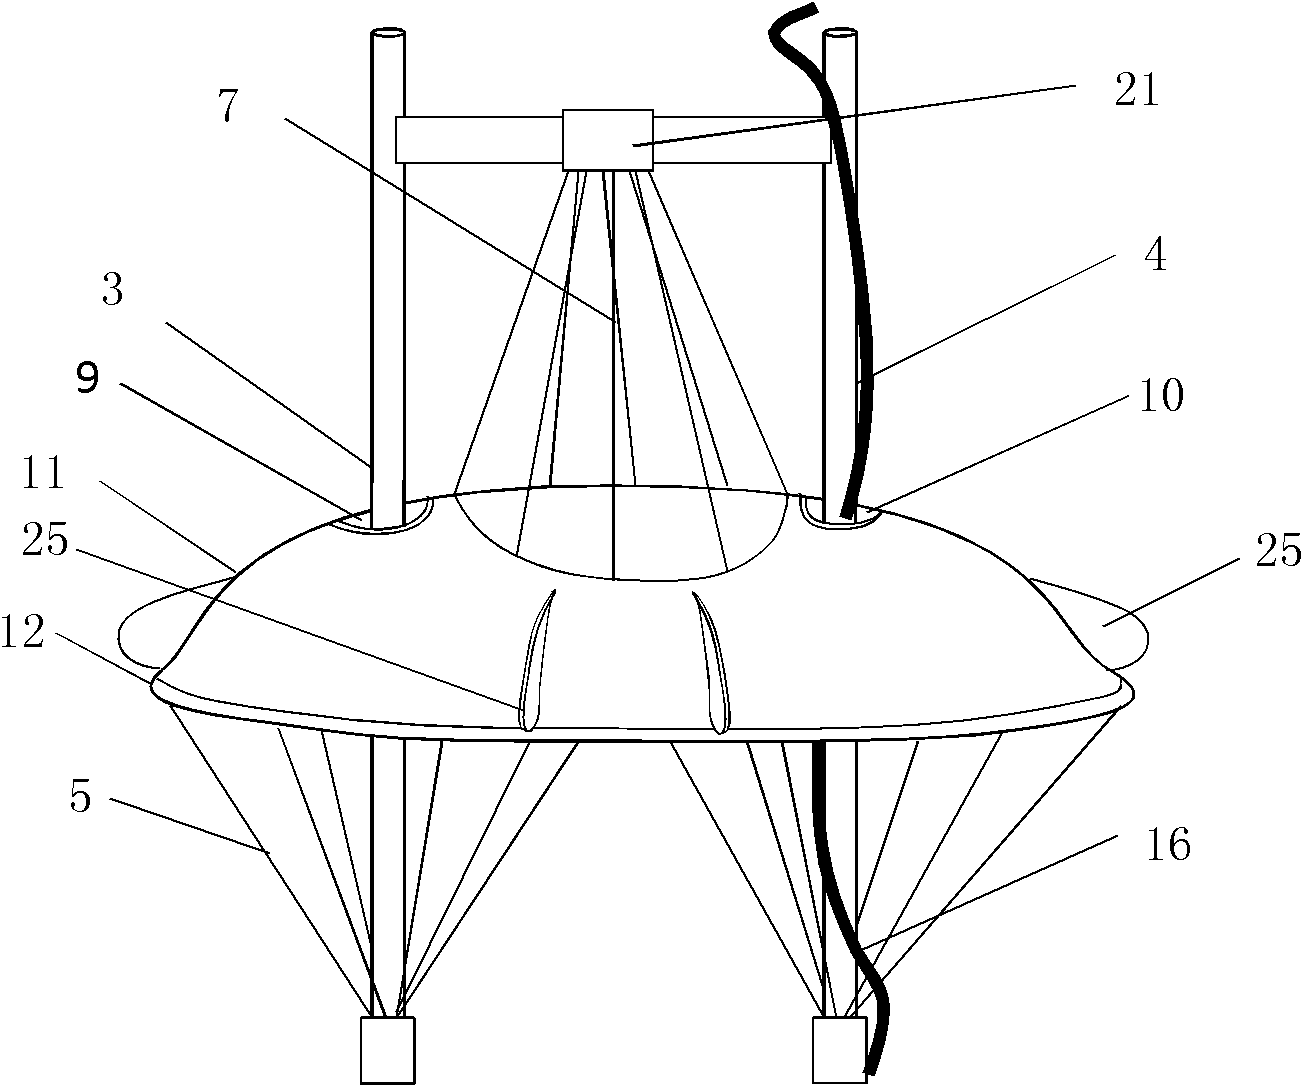 Retractable inflation-type wind energy umbrella sail device with double brackets